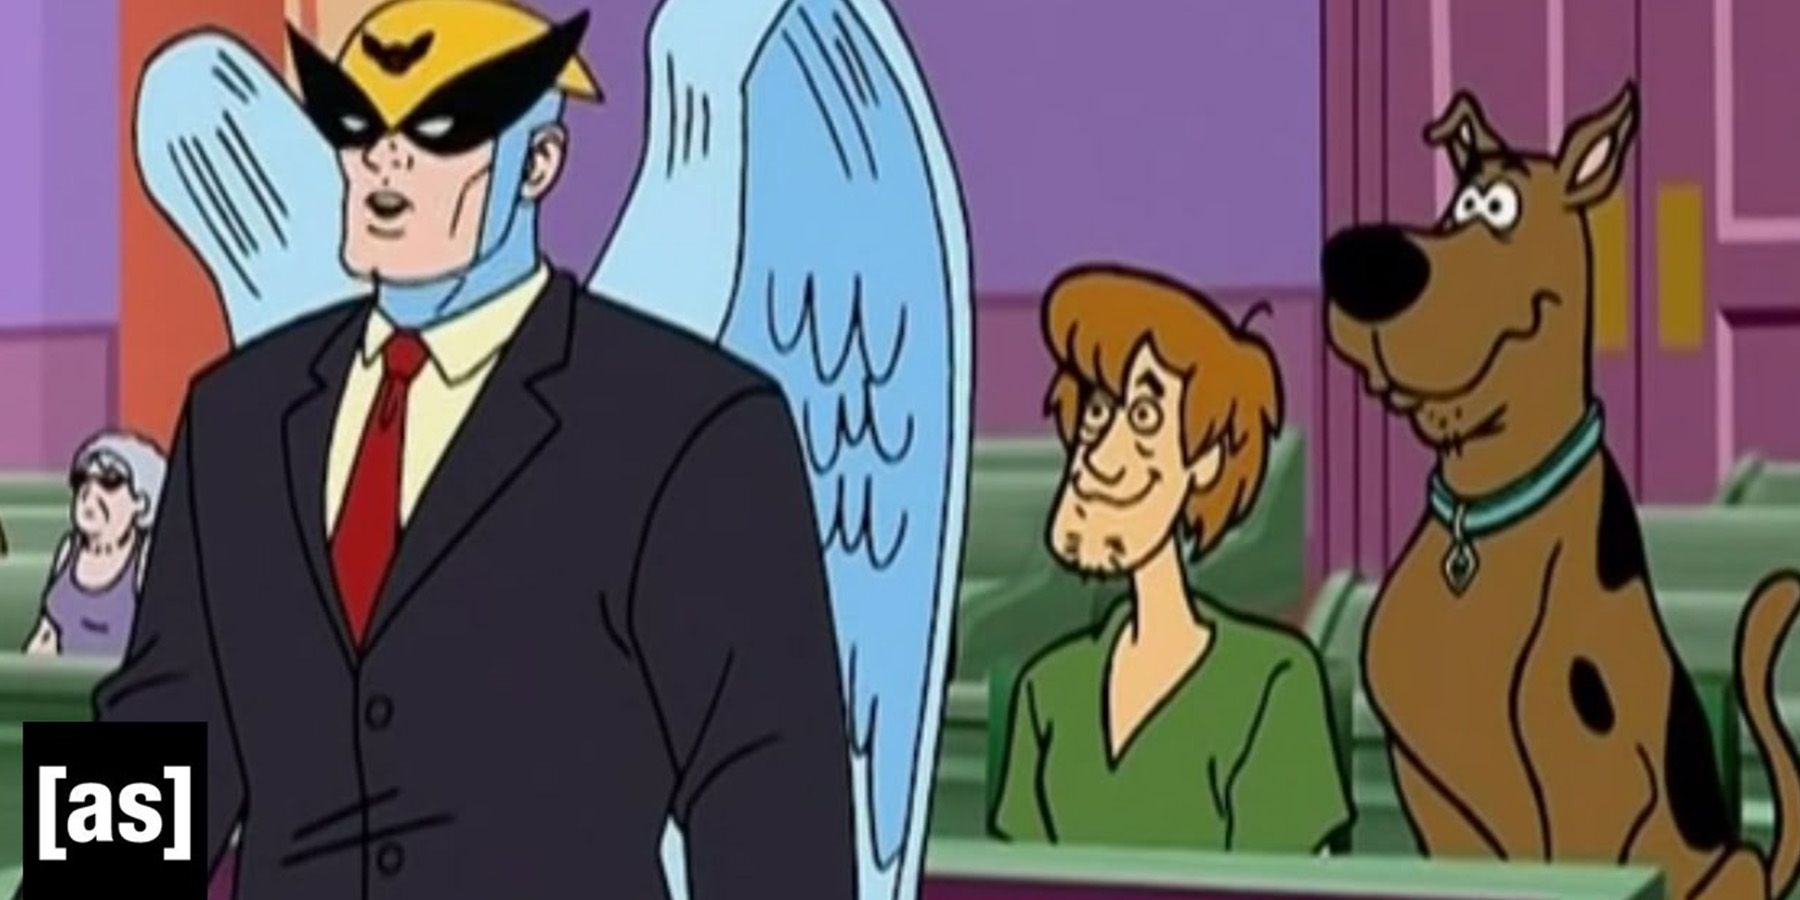 Harvey Birdman as a Lawyer, defending Scooby and Shaggy in court